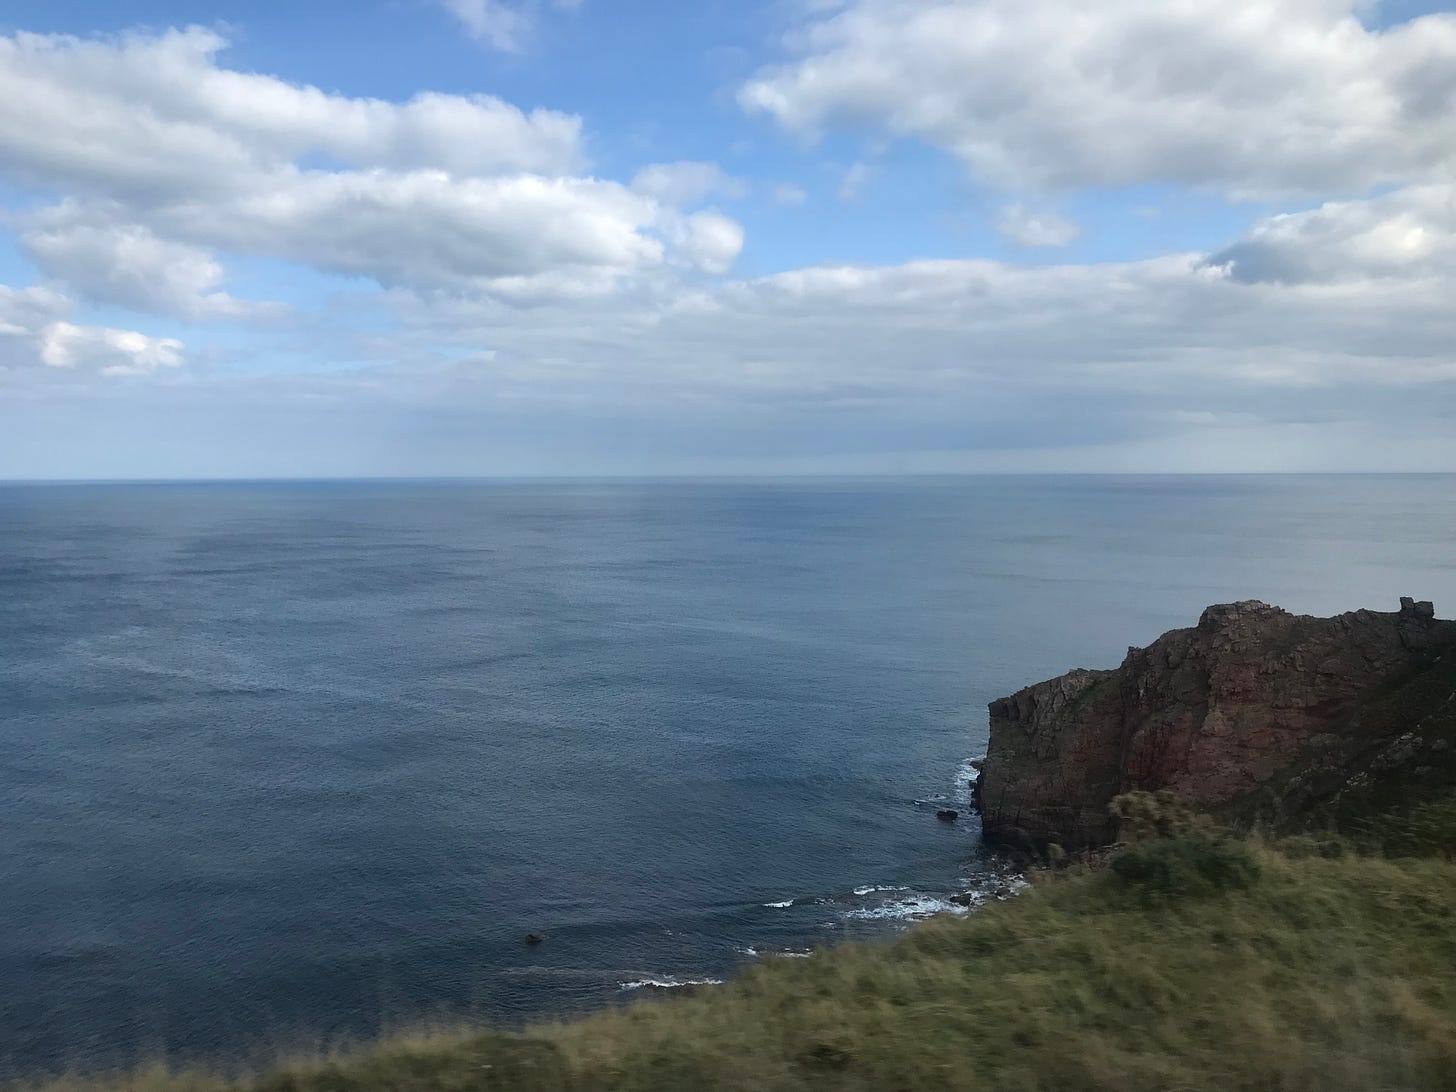 Looking at the North Sea and other landscapes from the train window, all I could think was "Get me away from here, I'm dying," where here=New York. I need to move, is what I'm saying.